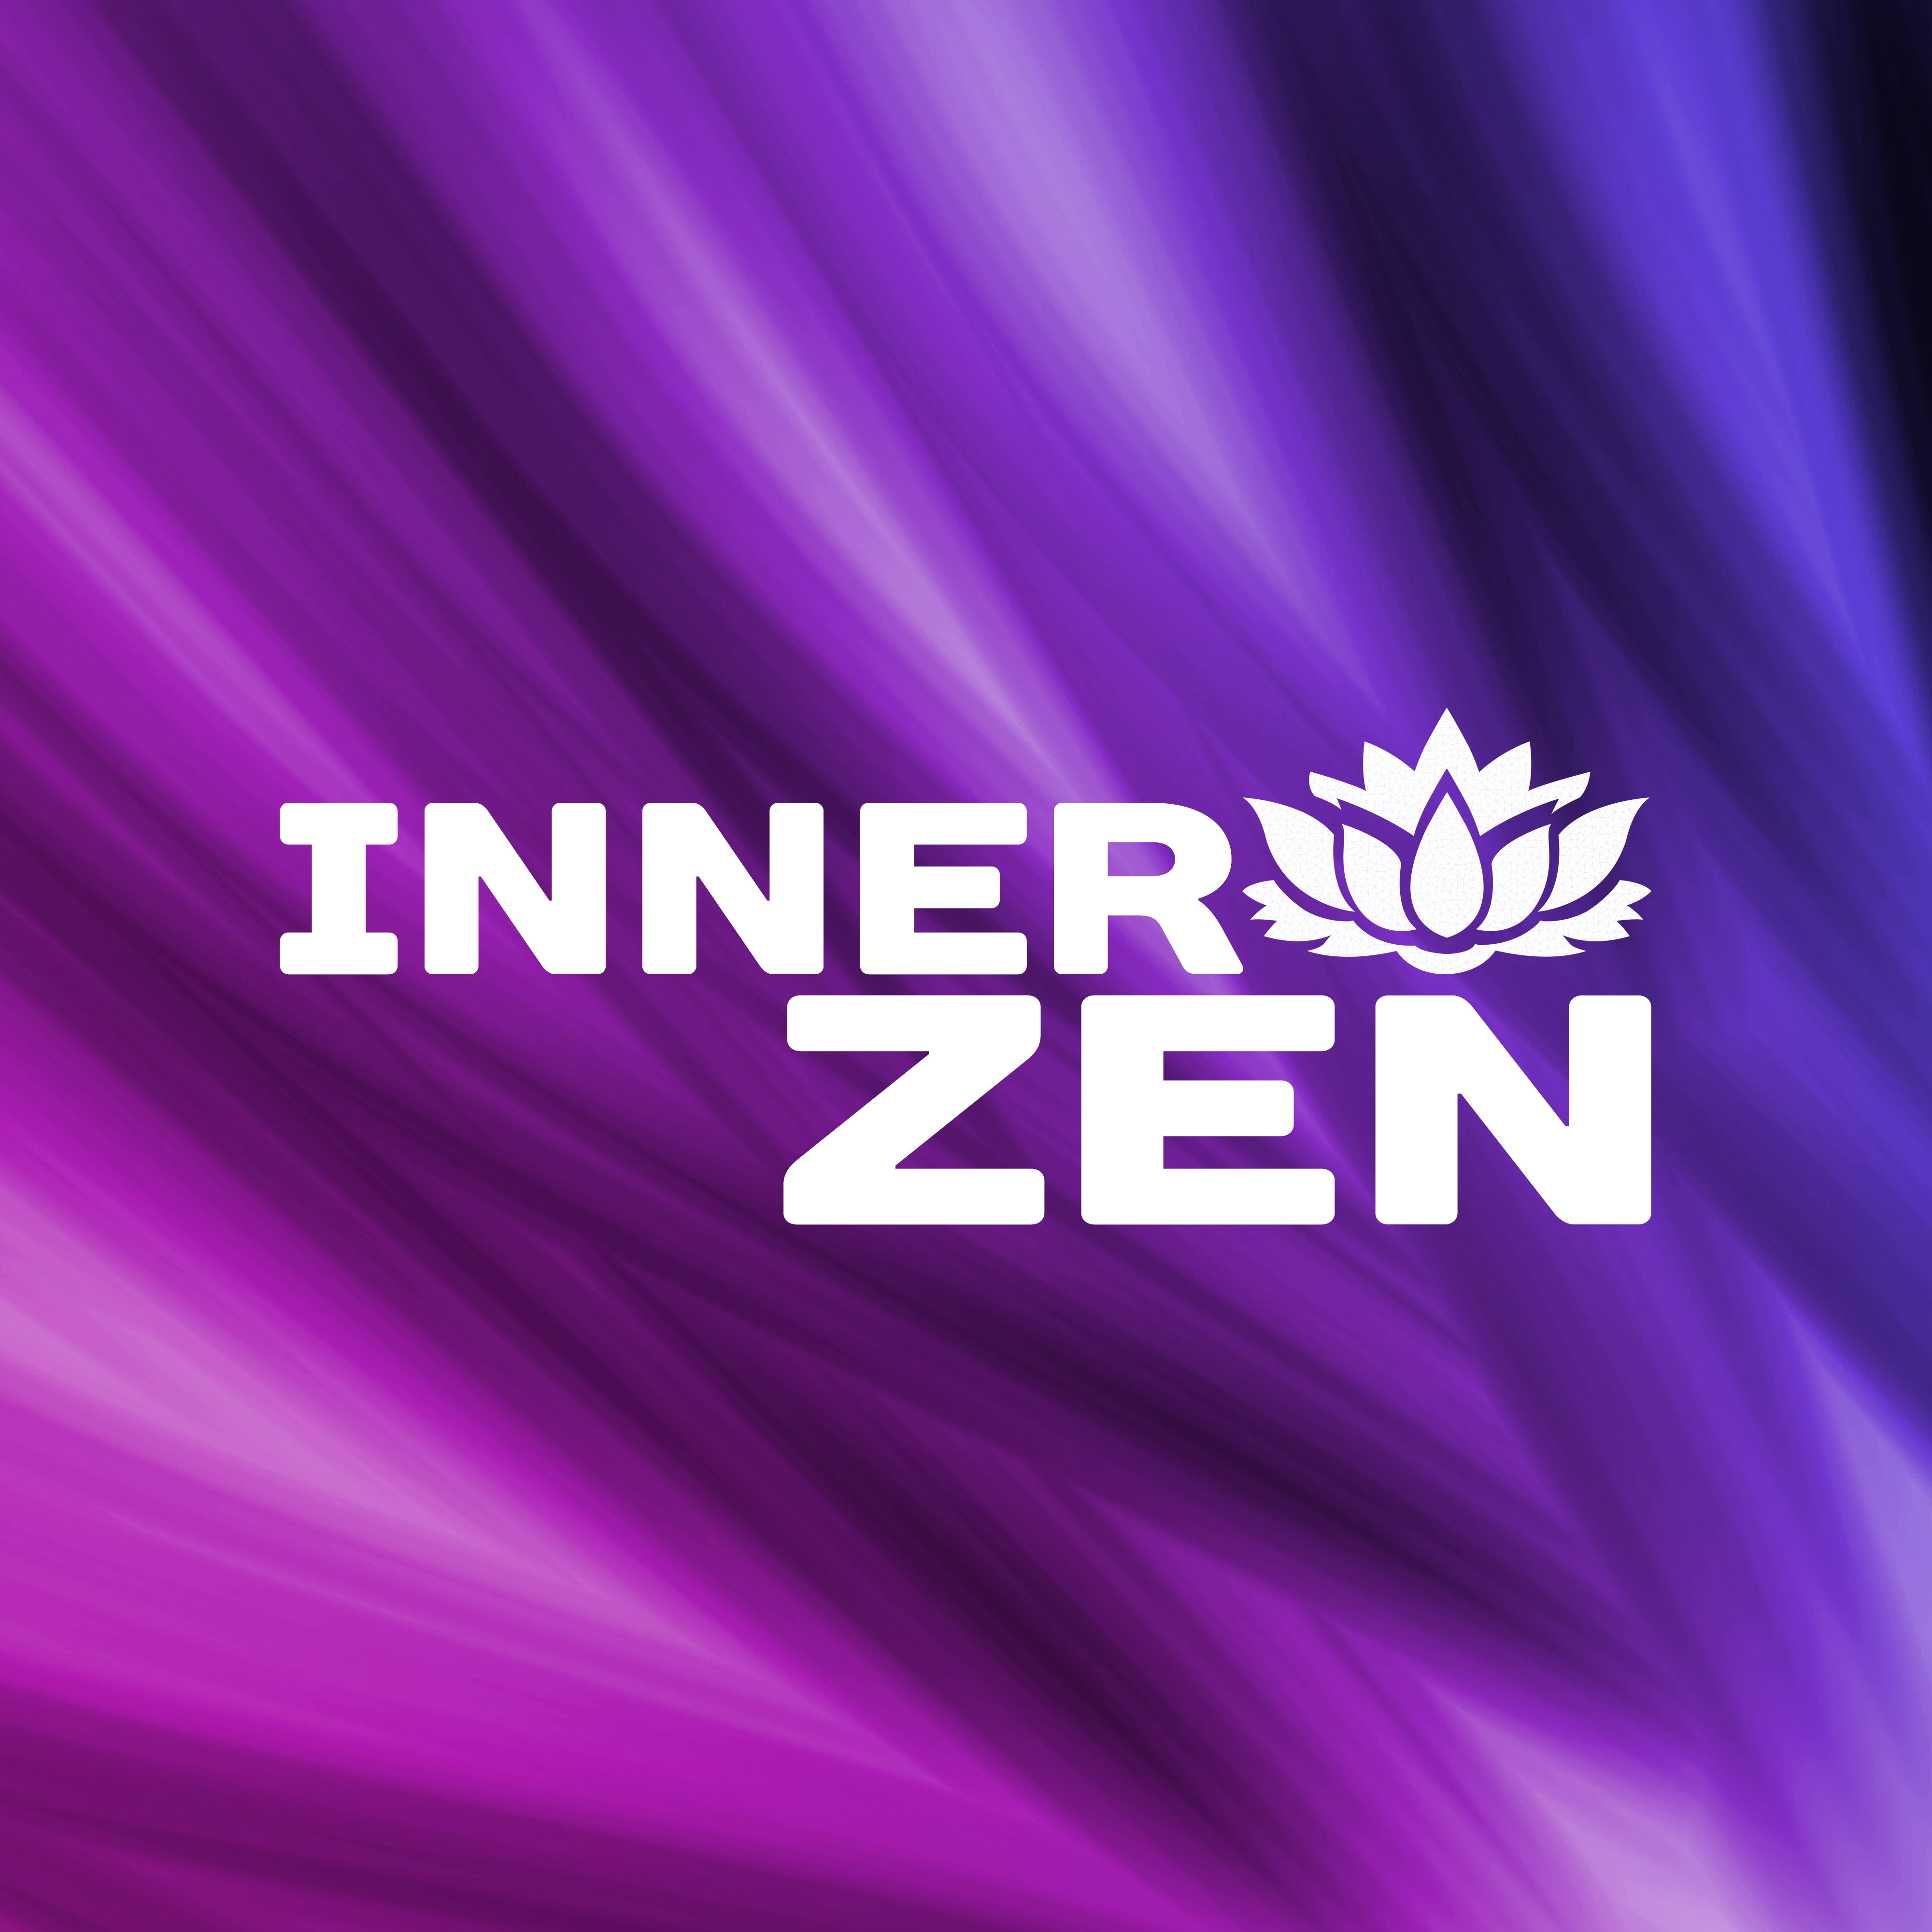 Inner Zen – Meditation Music, Training Yoga, Deep Concentration, Relax, Tranquility